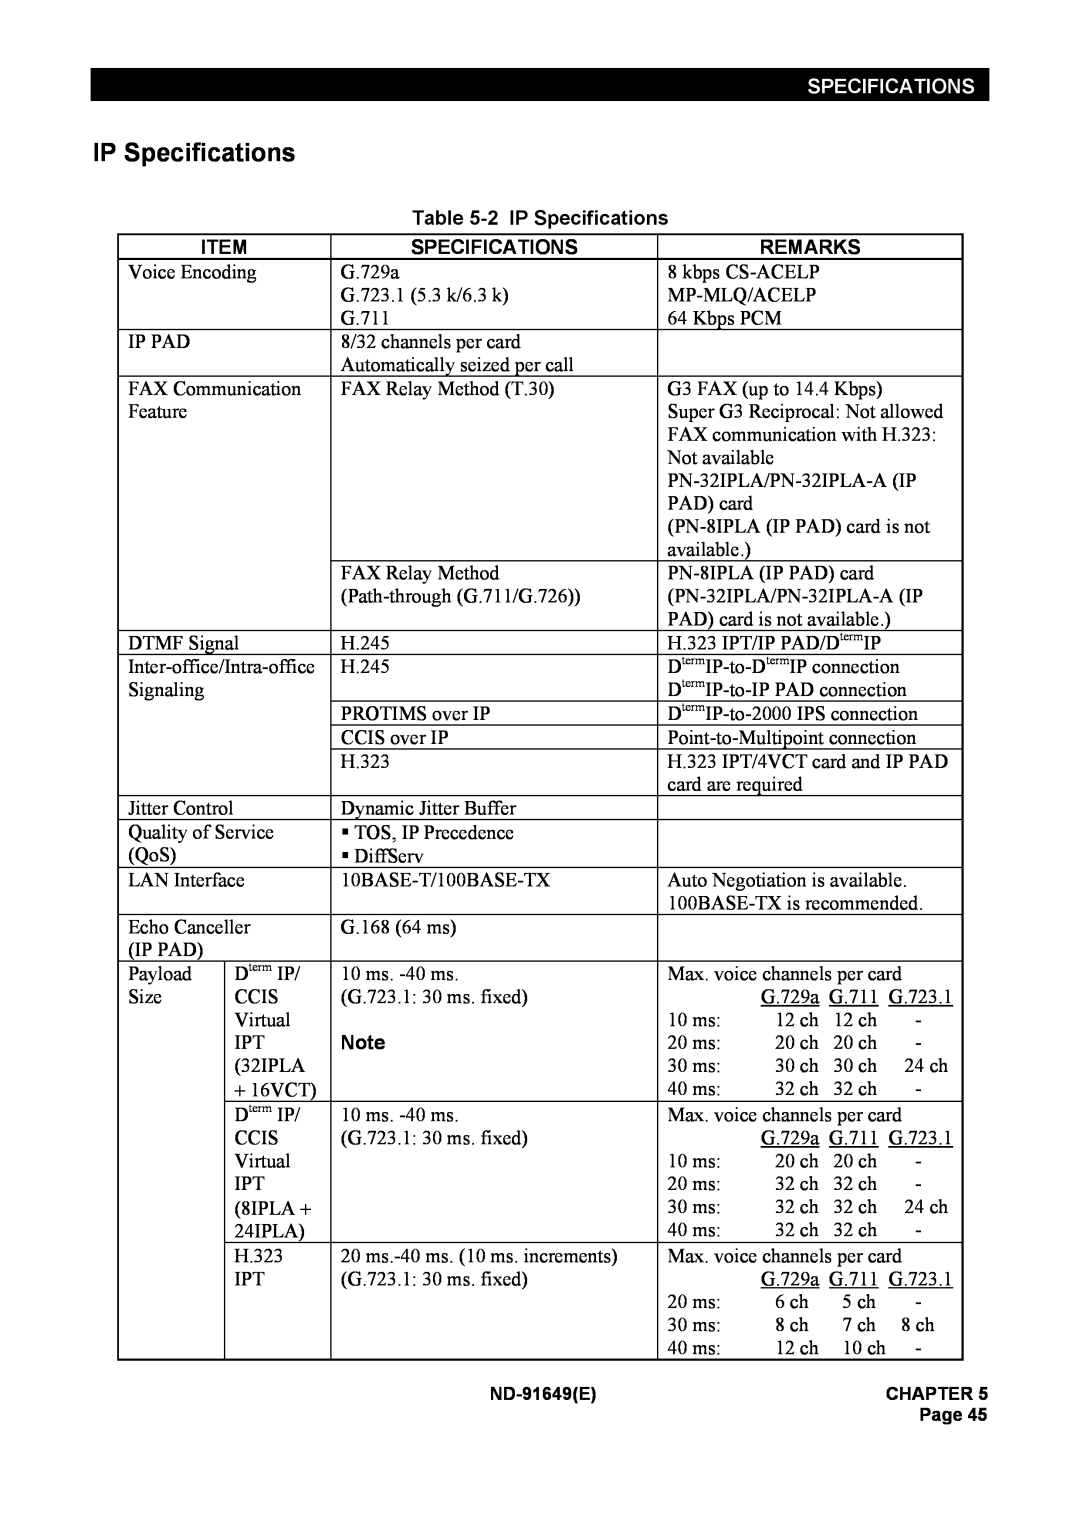 NEC ND-91649 manual 2 IP Specifications, Remarks 